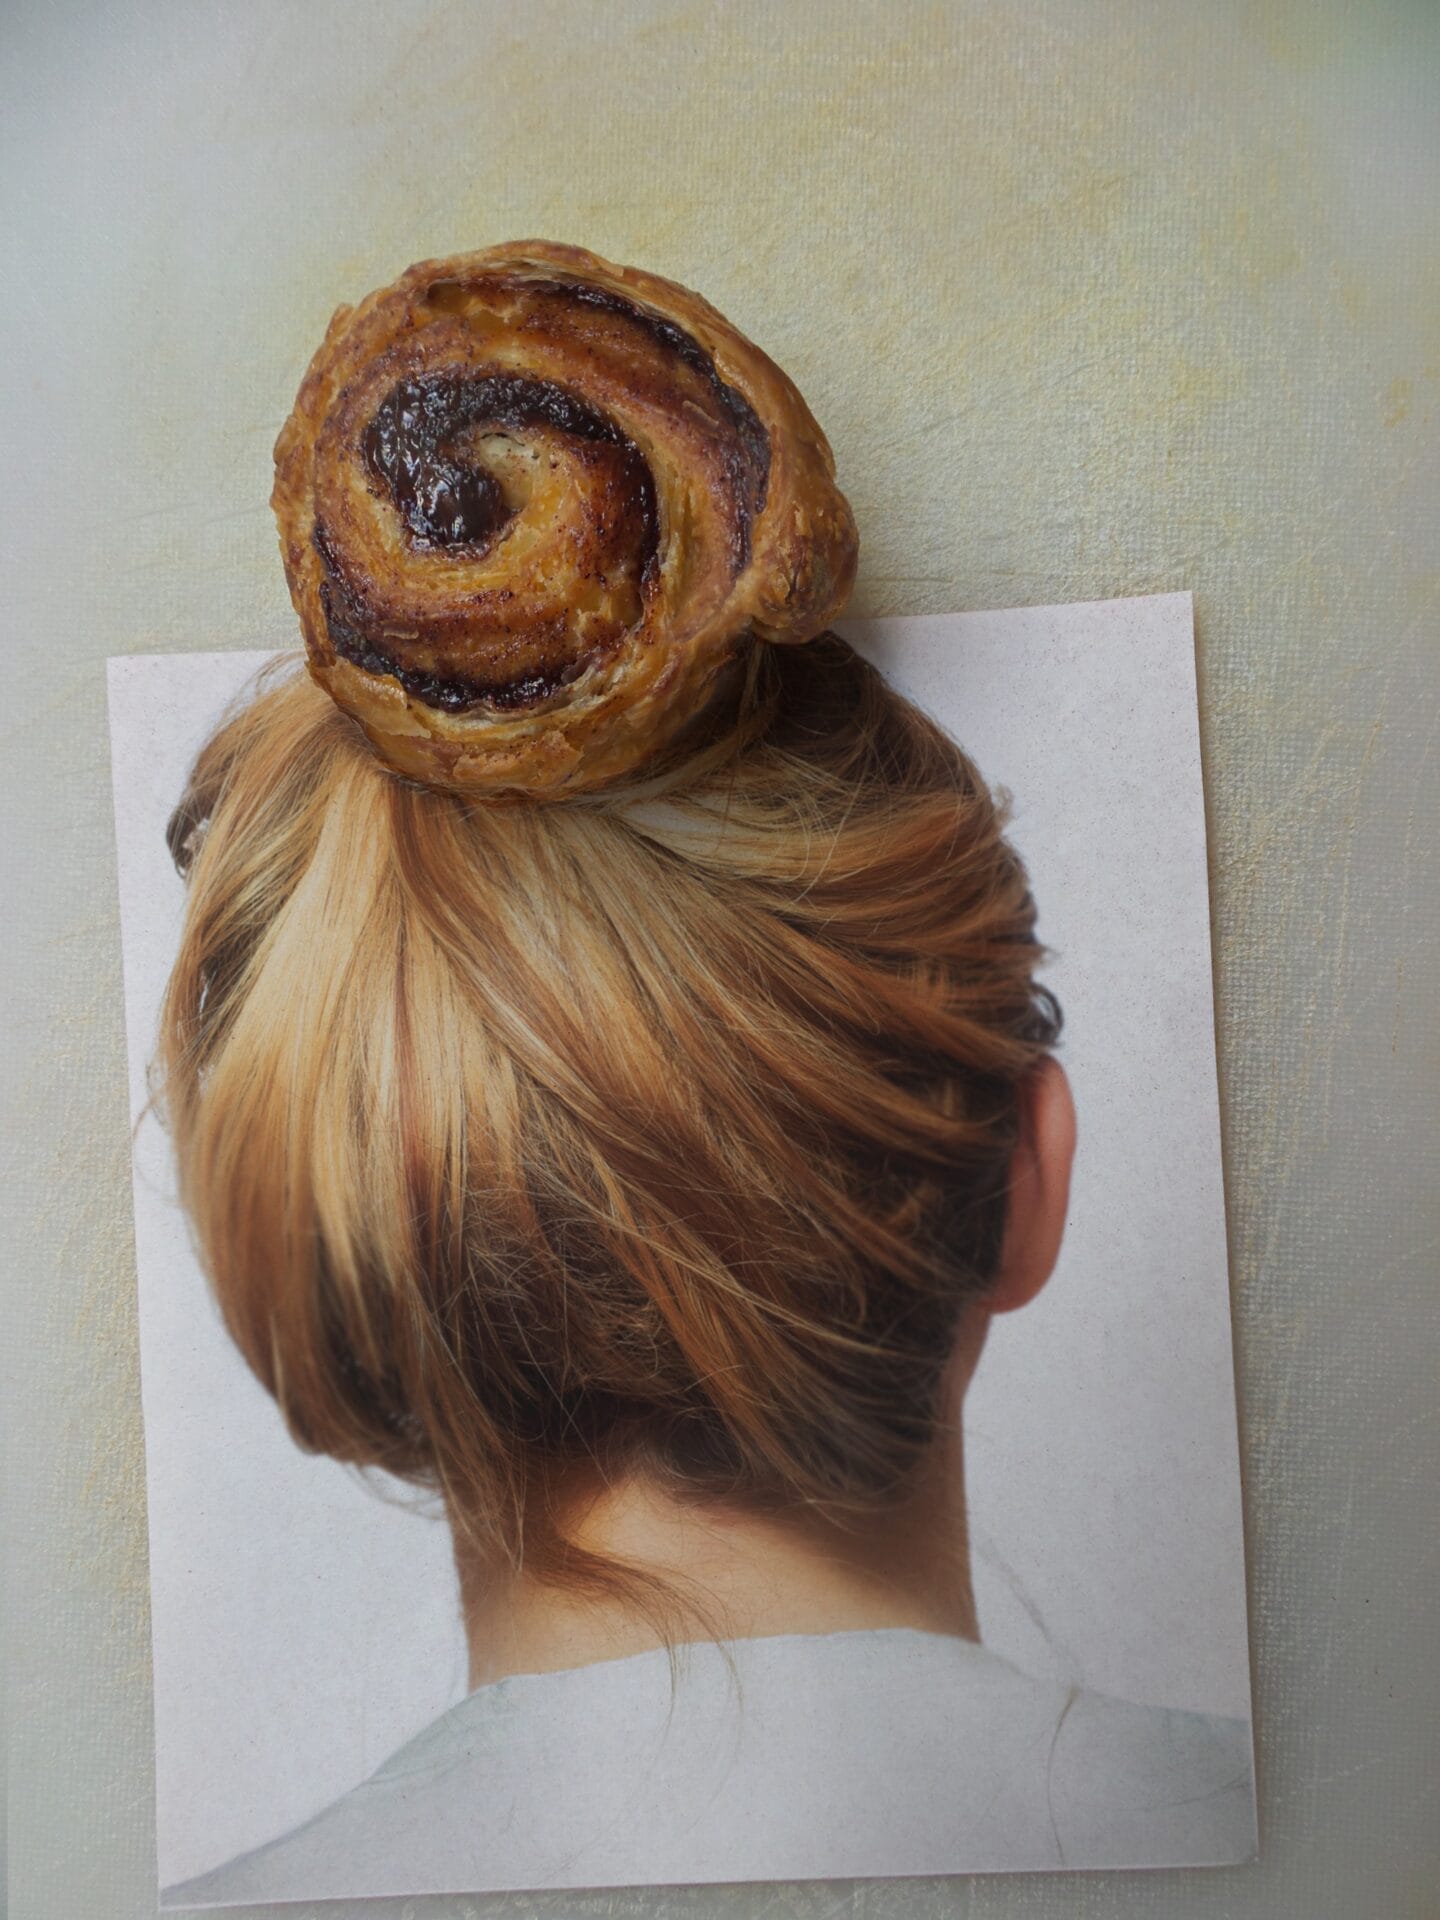 a photograph of a woman with her hair tied up in a bun, and a cinnamon bun situated where her own hair bun would be